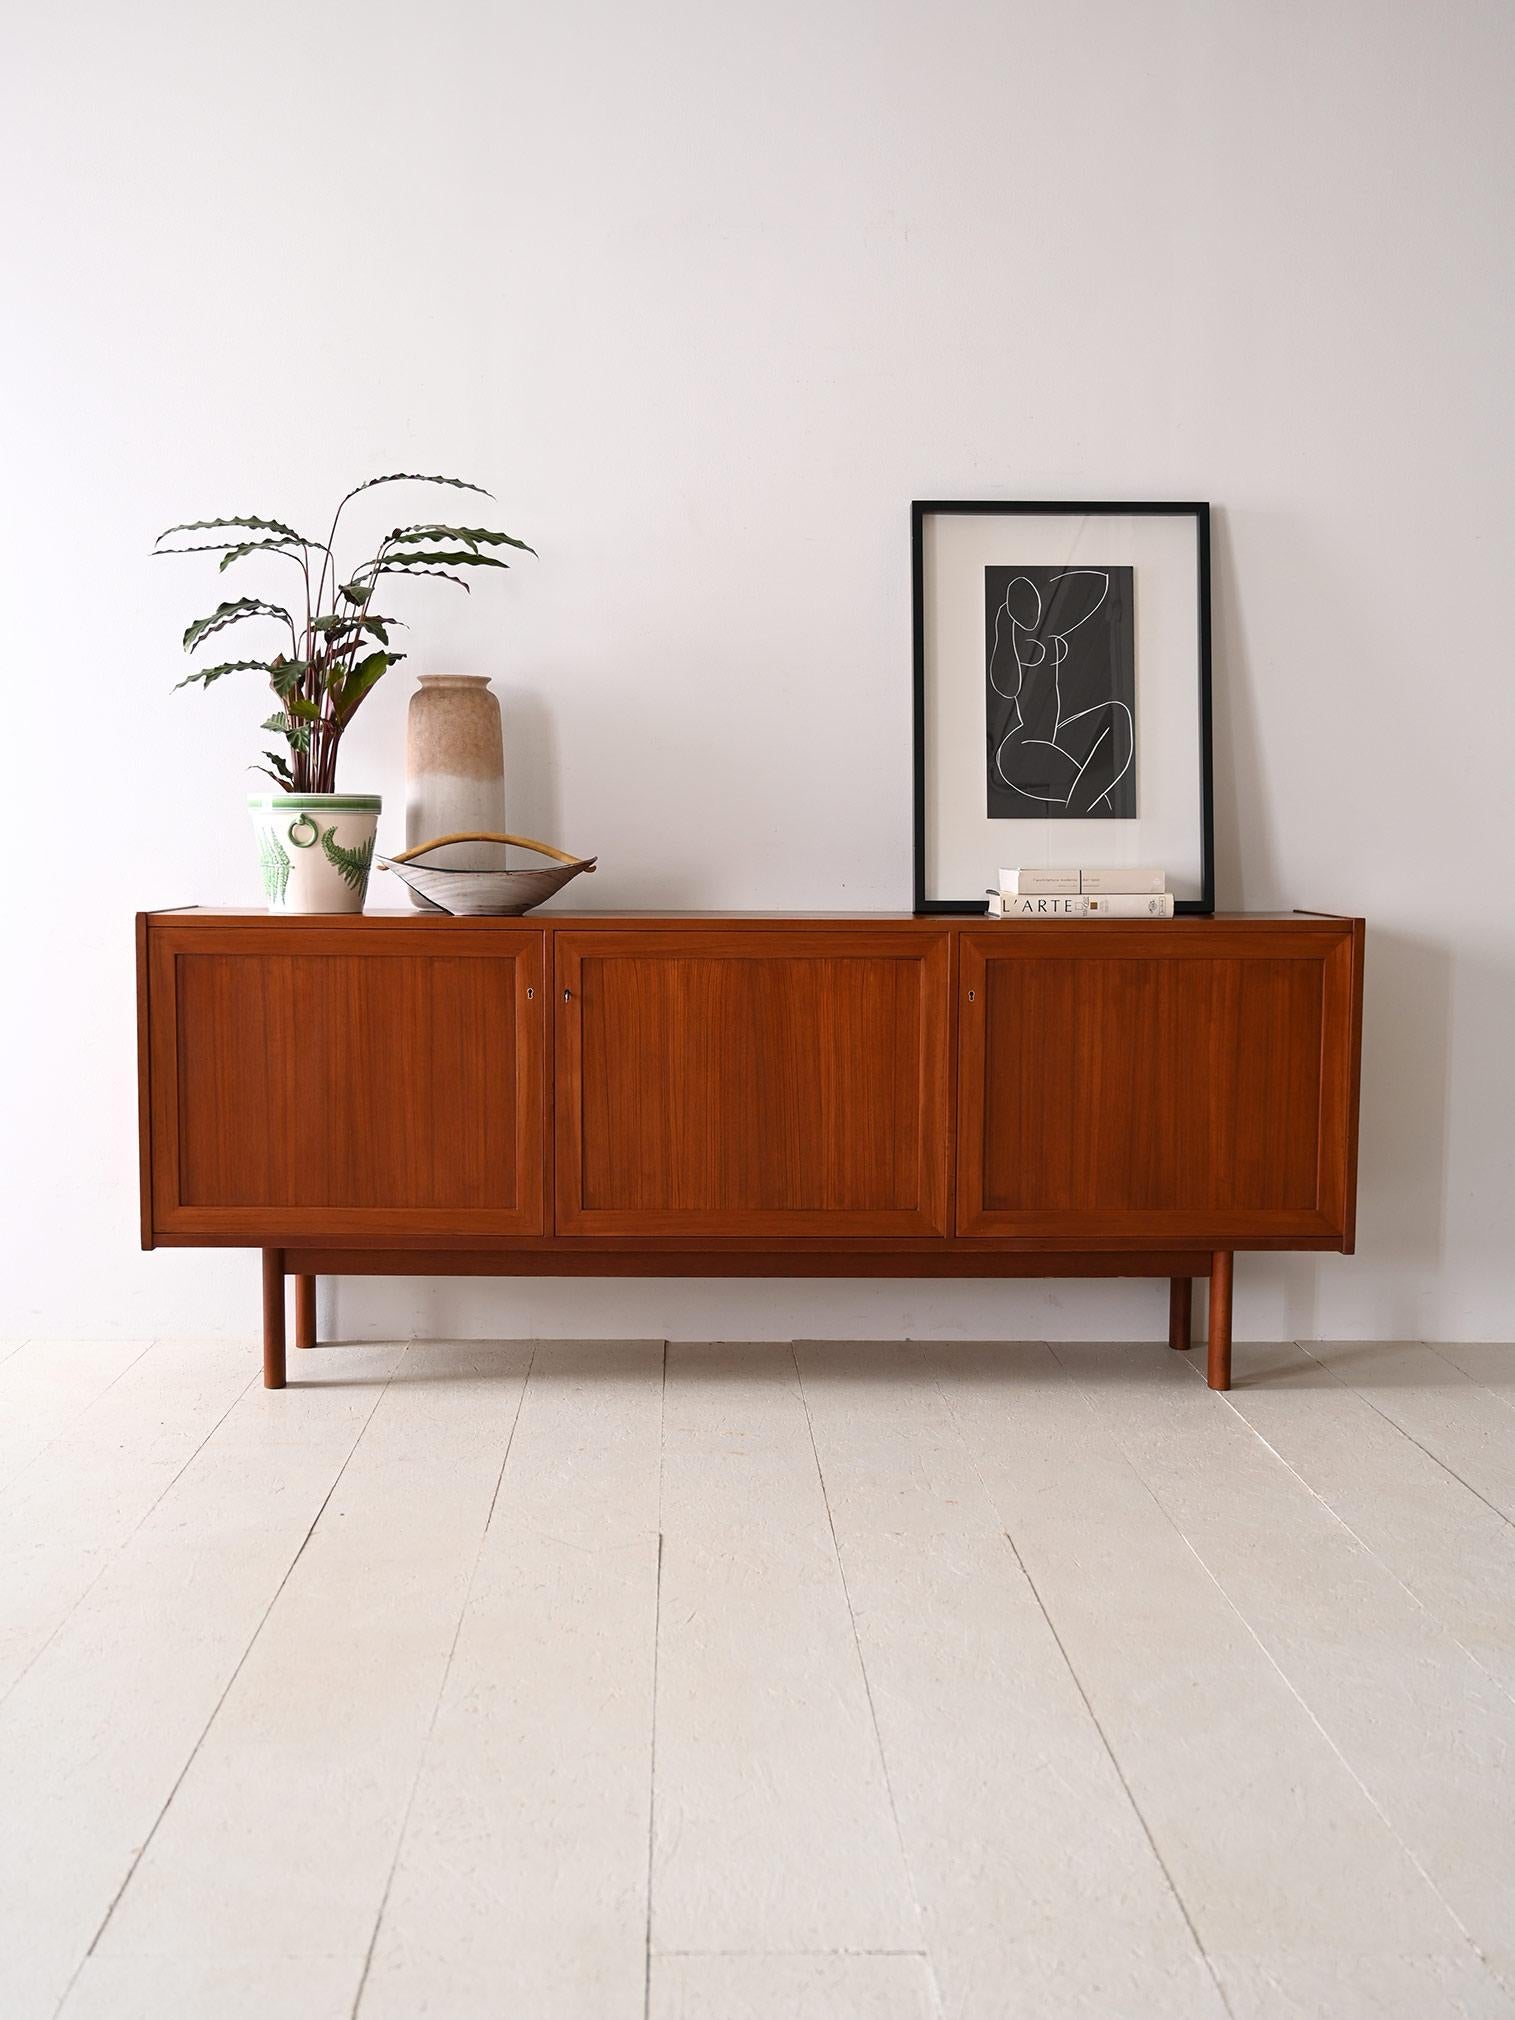 Scandinavian teak sideboard original vintage 1960s.

Featuring a simple structure with square, modern lines, this piece embodies the spirit of Nordic design of the era. Made of fine teak wood, the sideboard exudes warmth and sophistication while the